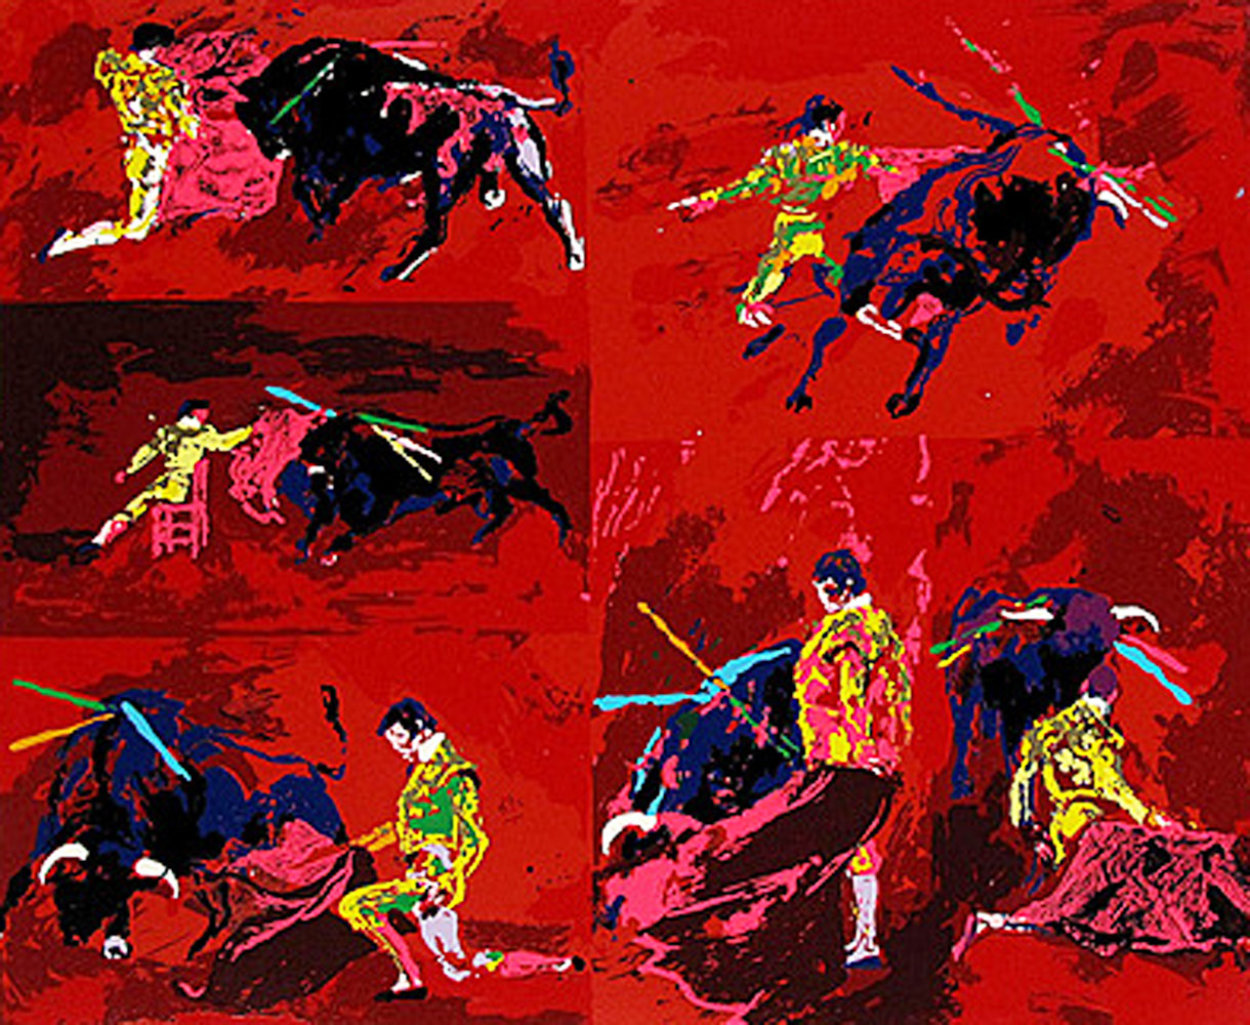 Red Corrida AP 1974 Limited Edition Print by LeRoy Neiman